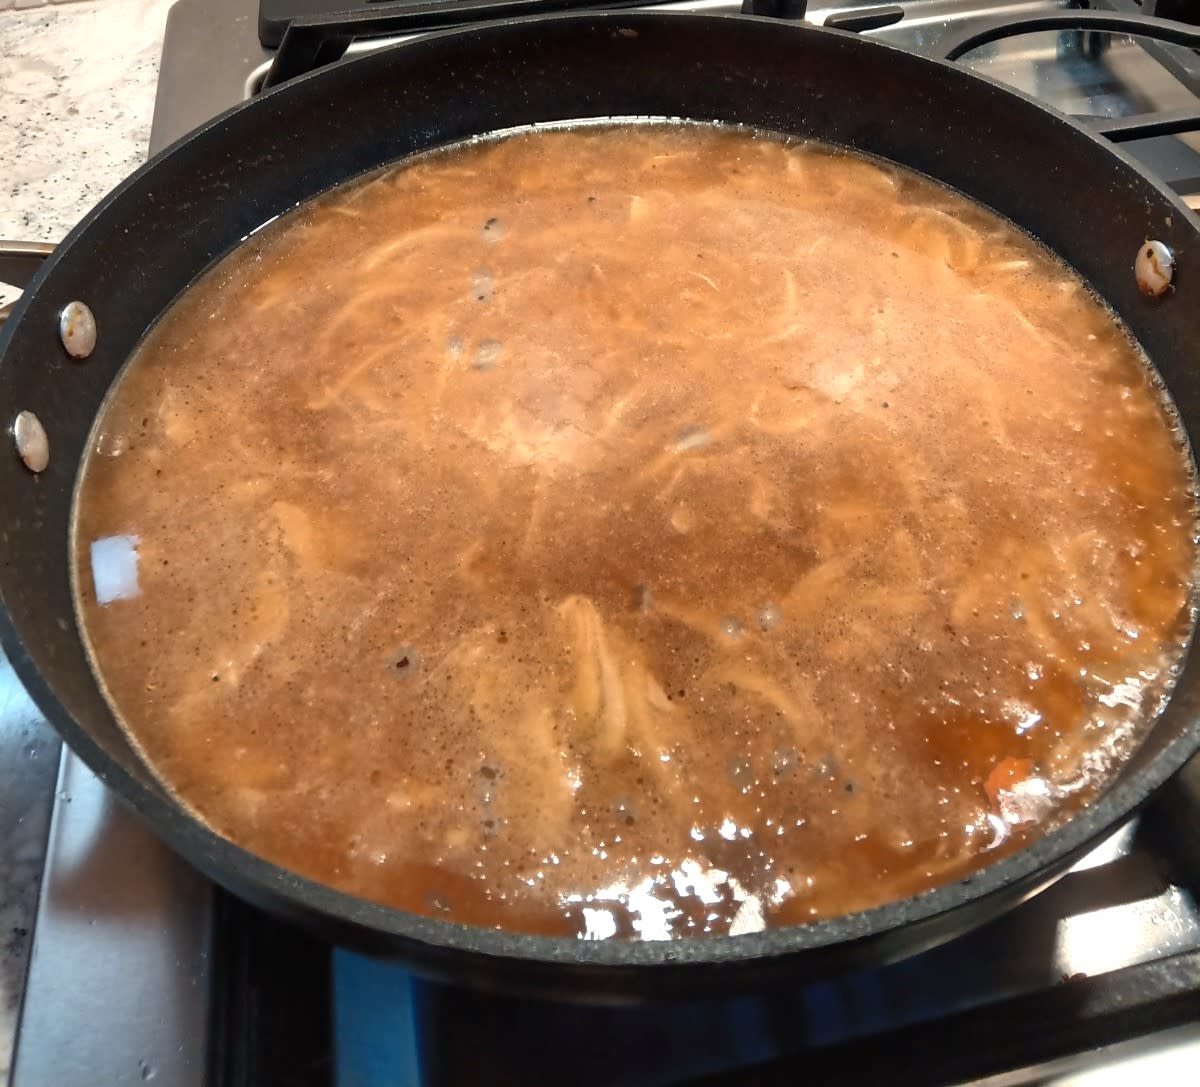 Beef broth added to the pan